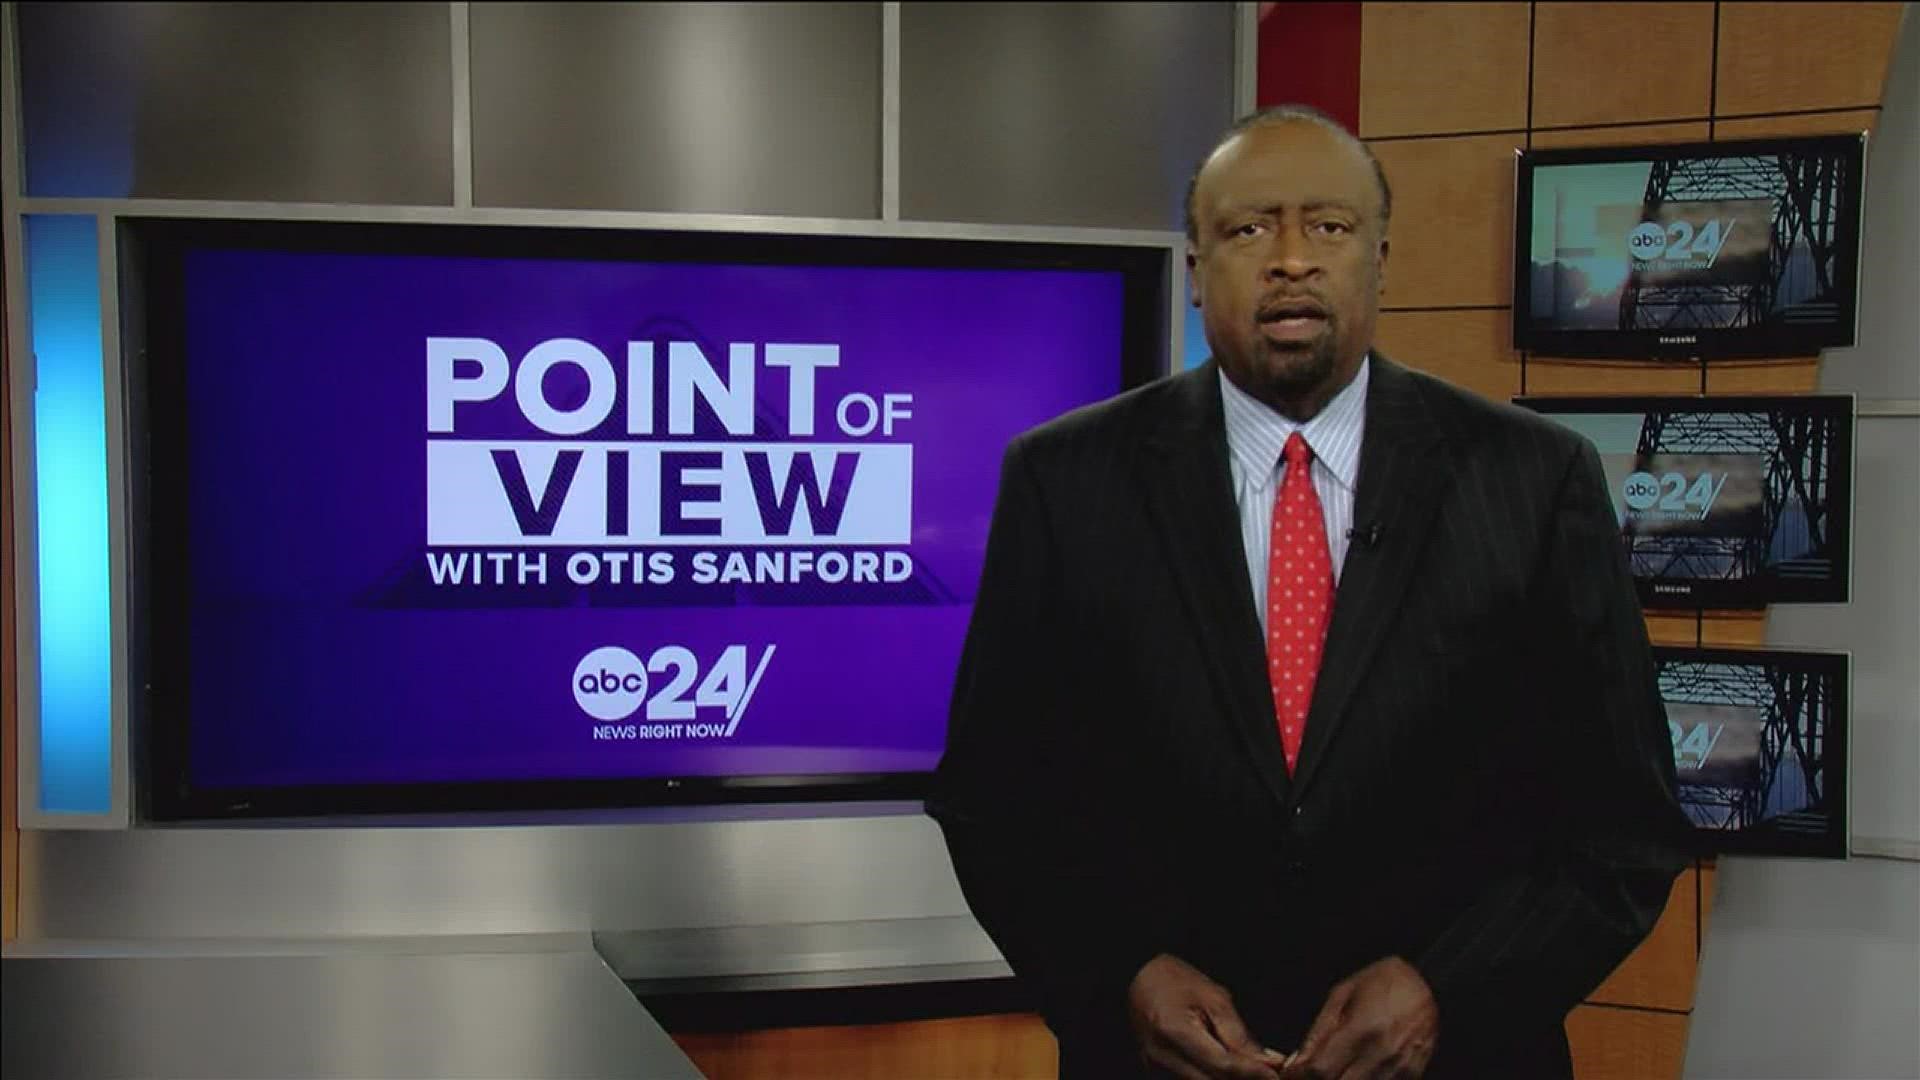 ABC 24 political analyst and commentator Otis Sanford shared his point of view on the abortion case before the U.S. Supreme Court.